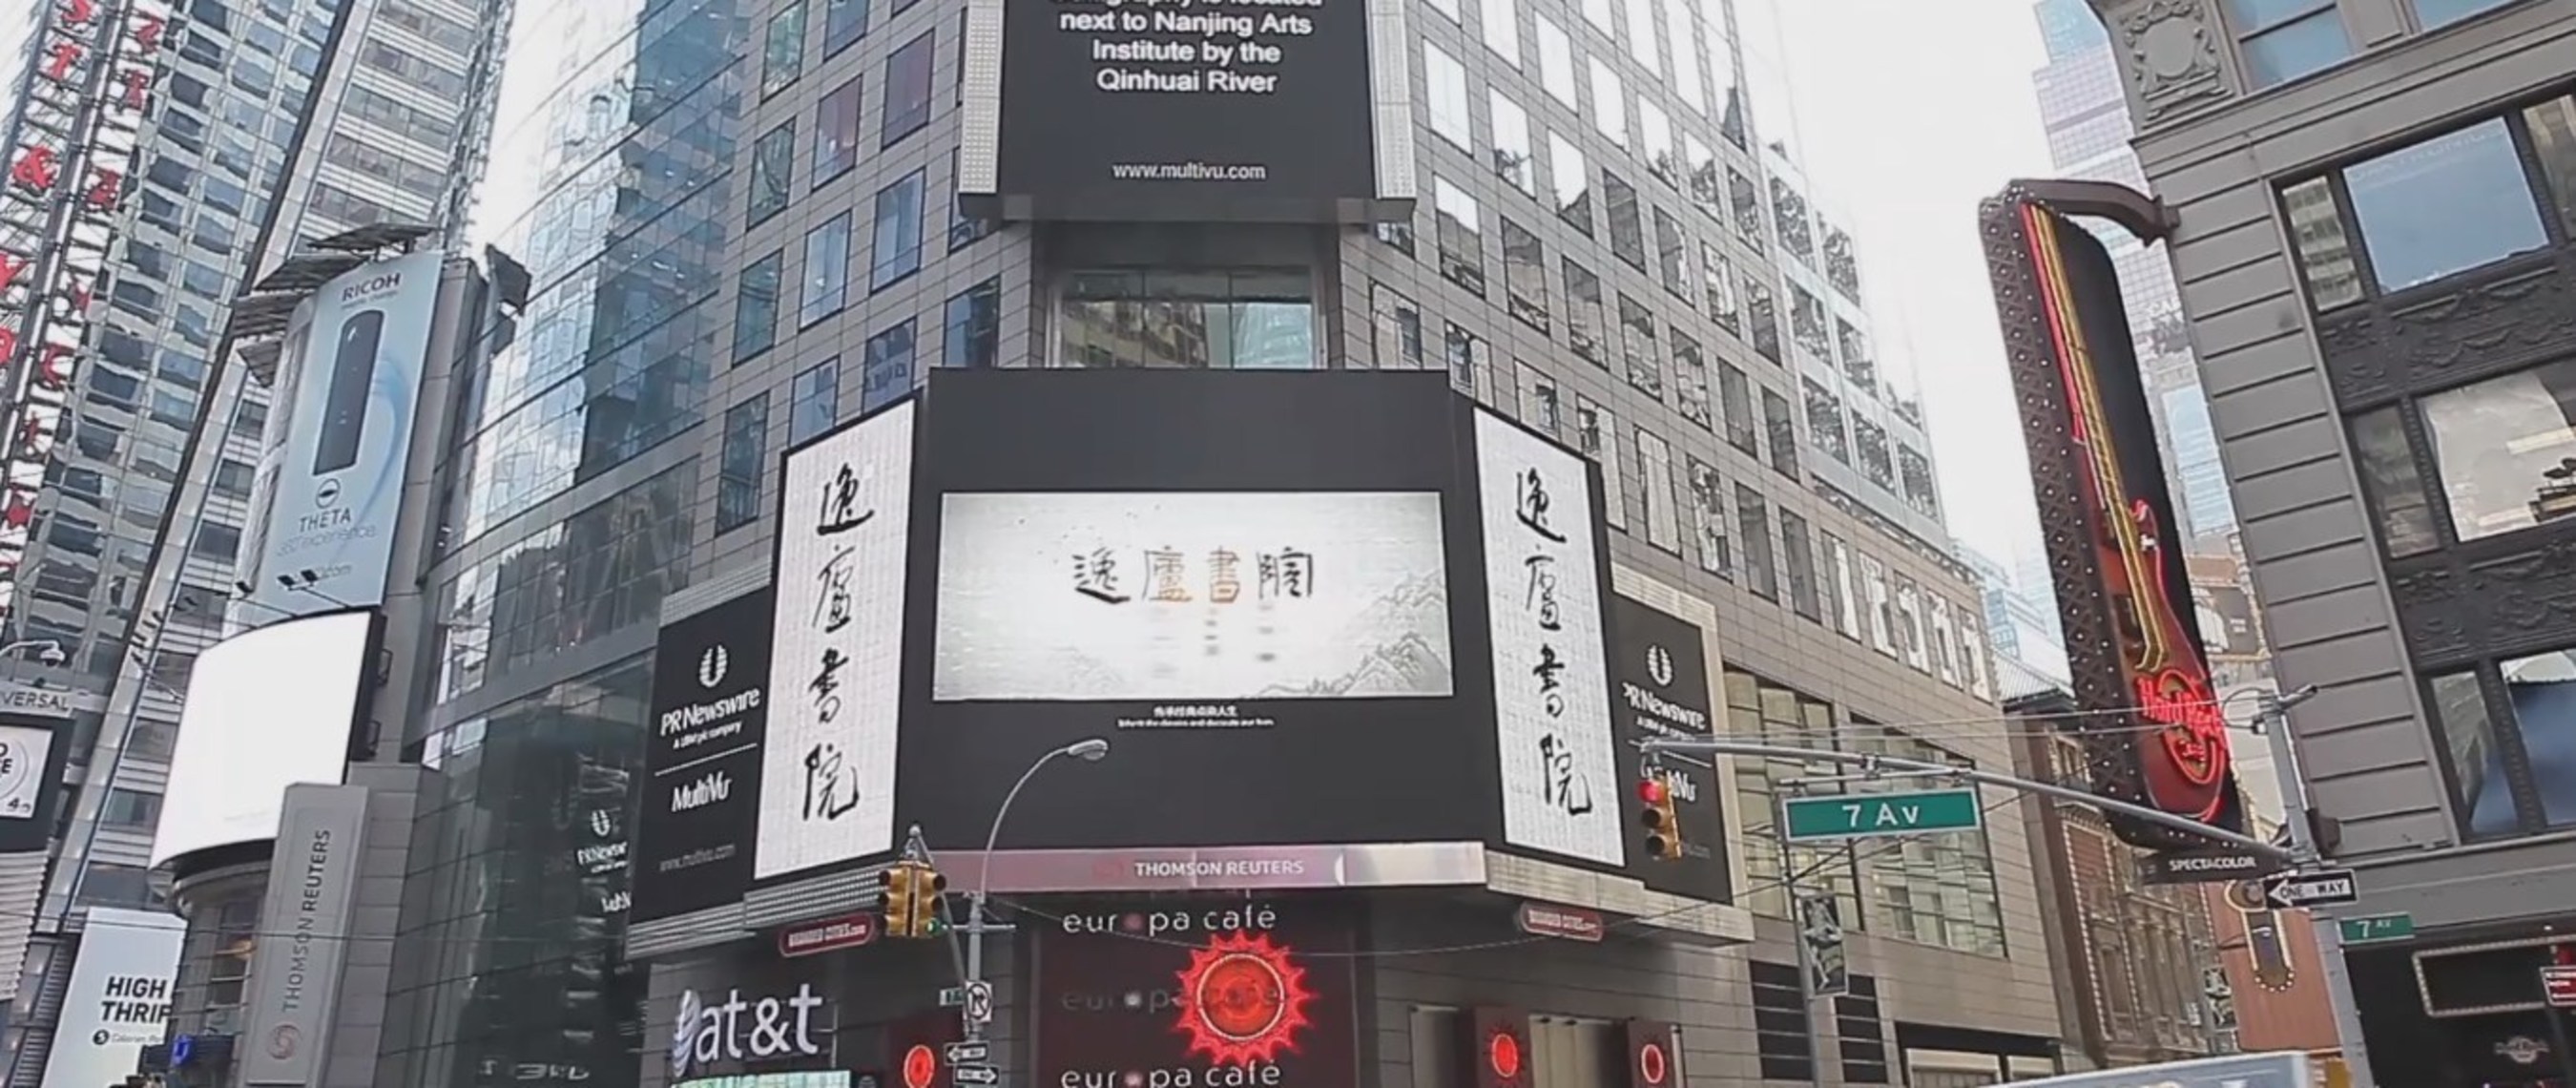 Yilu Academy of Calligraphy featured in Times Square